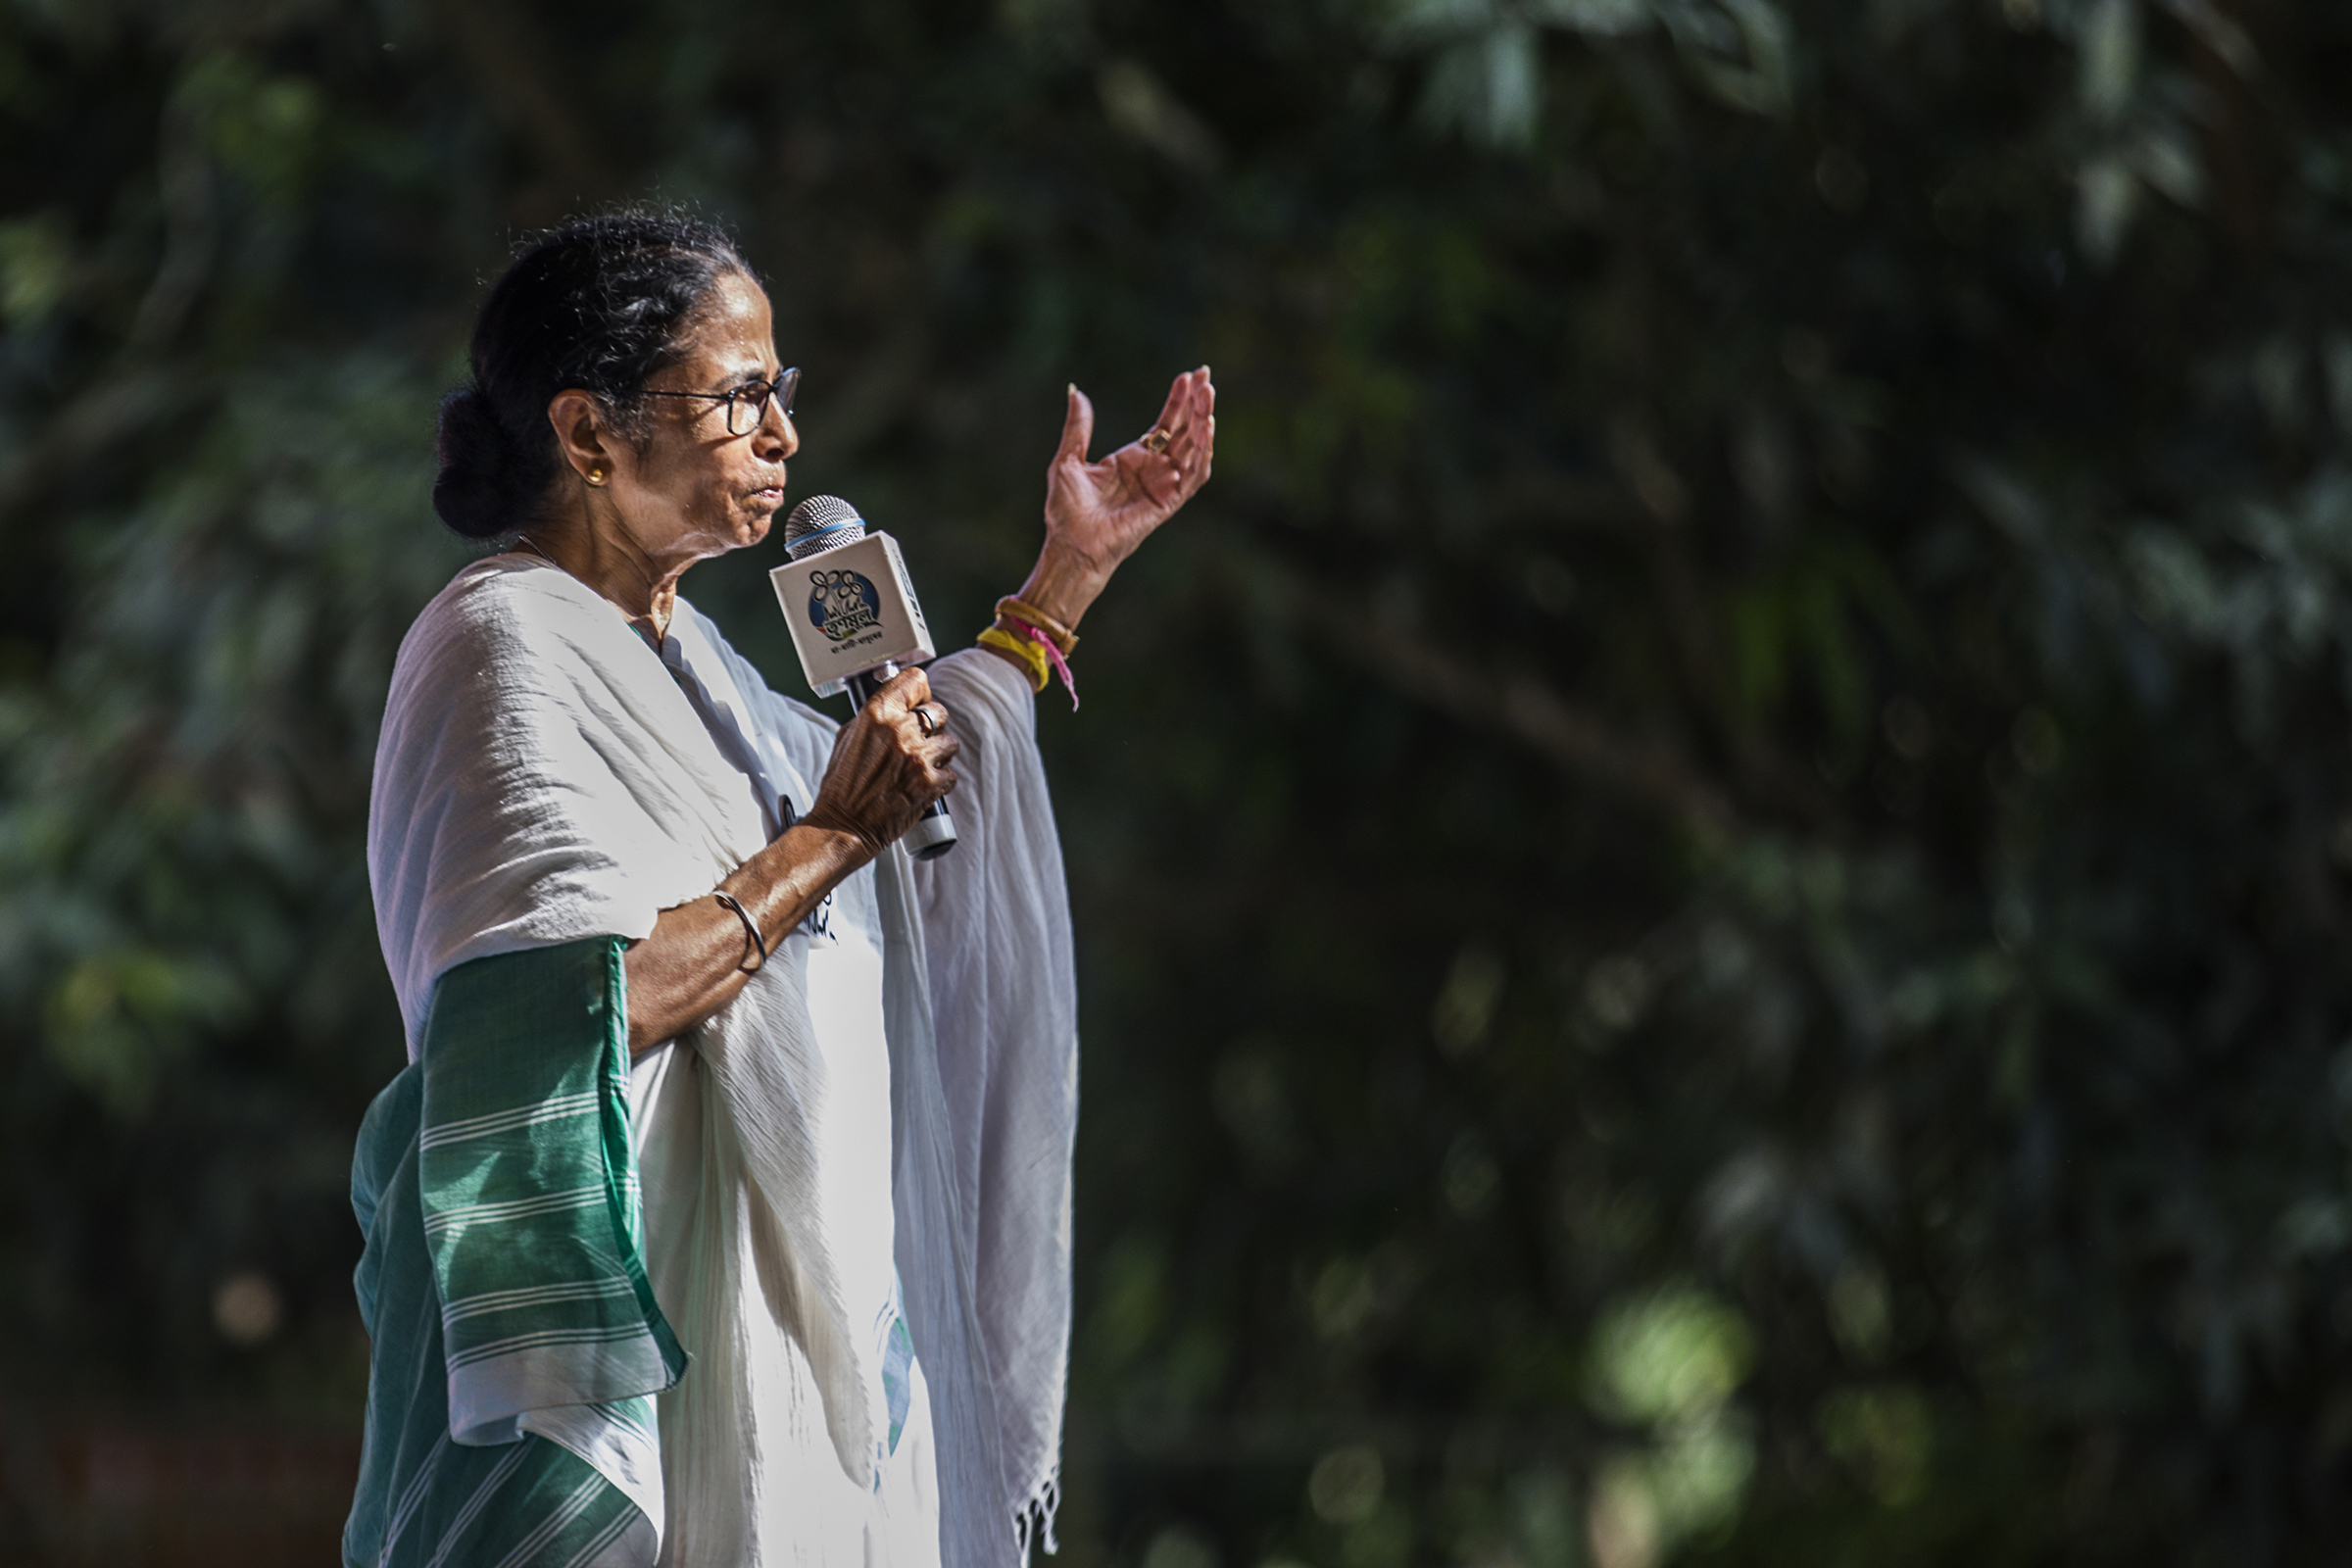 Mamata Banerjee Is on the 2021 TIME100 List | TIME